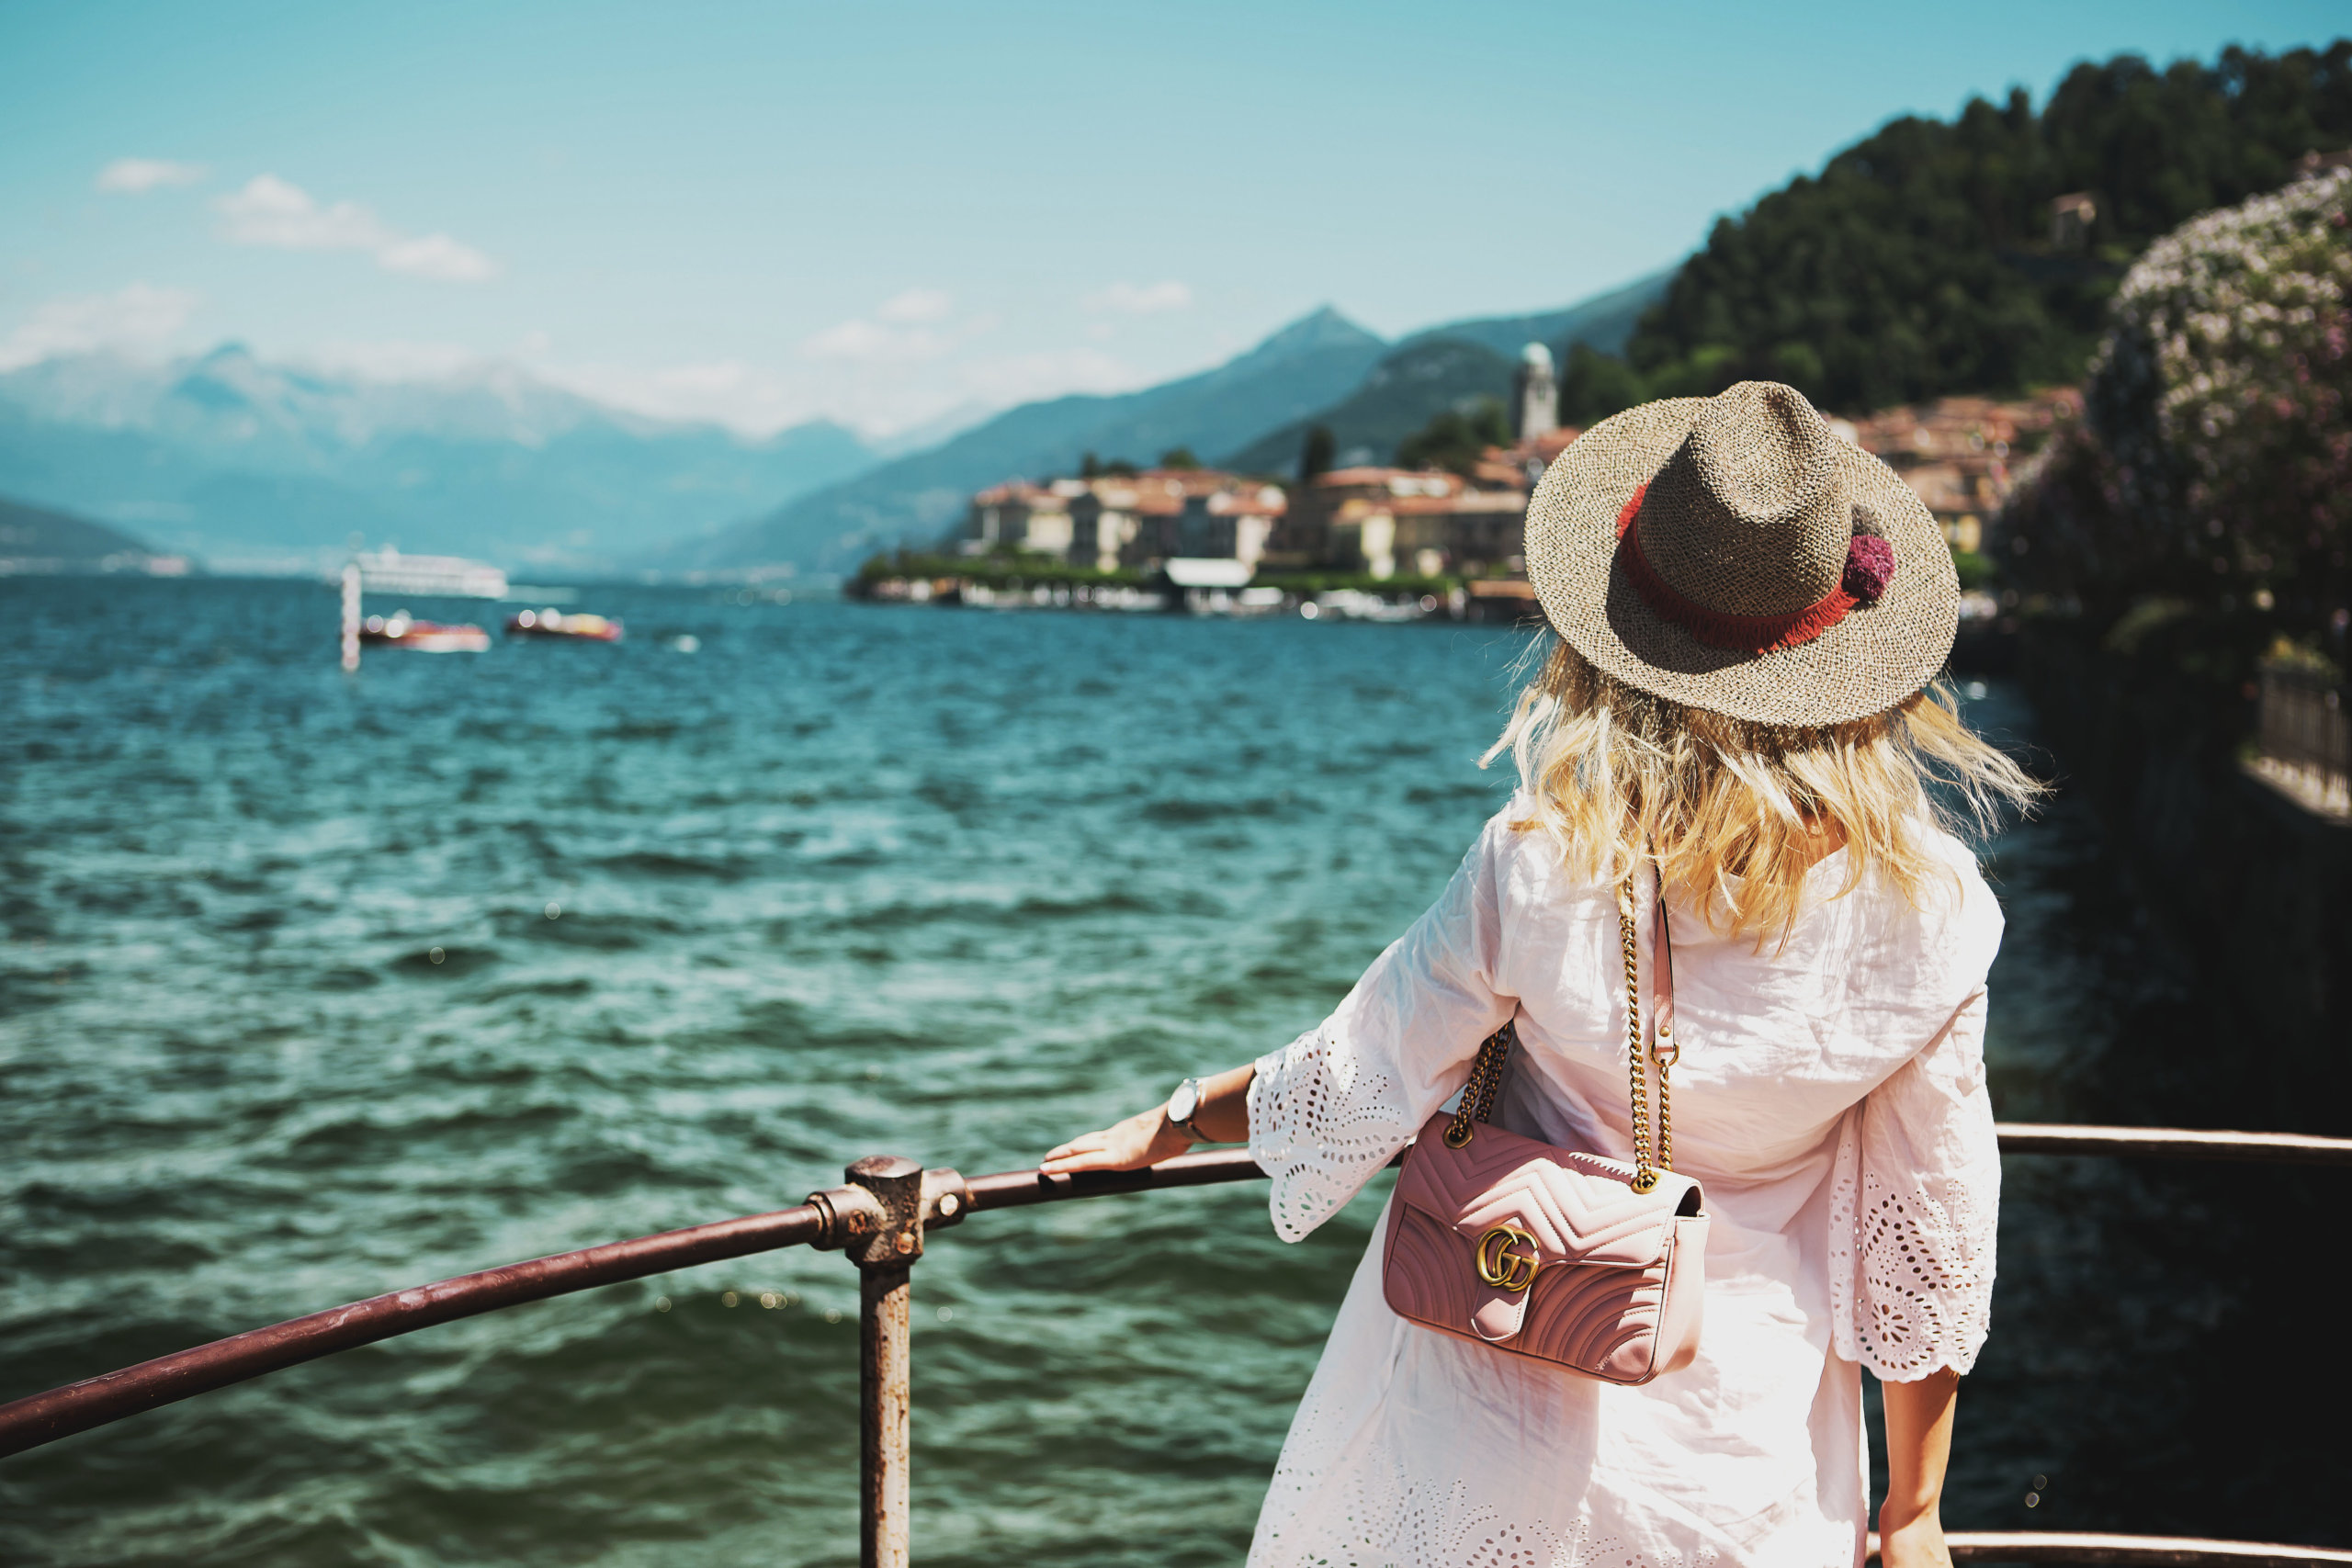 How to spend a day in Lake Como - the london thing